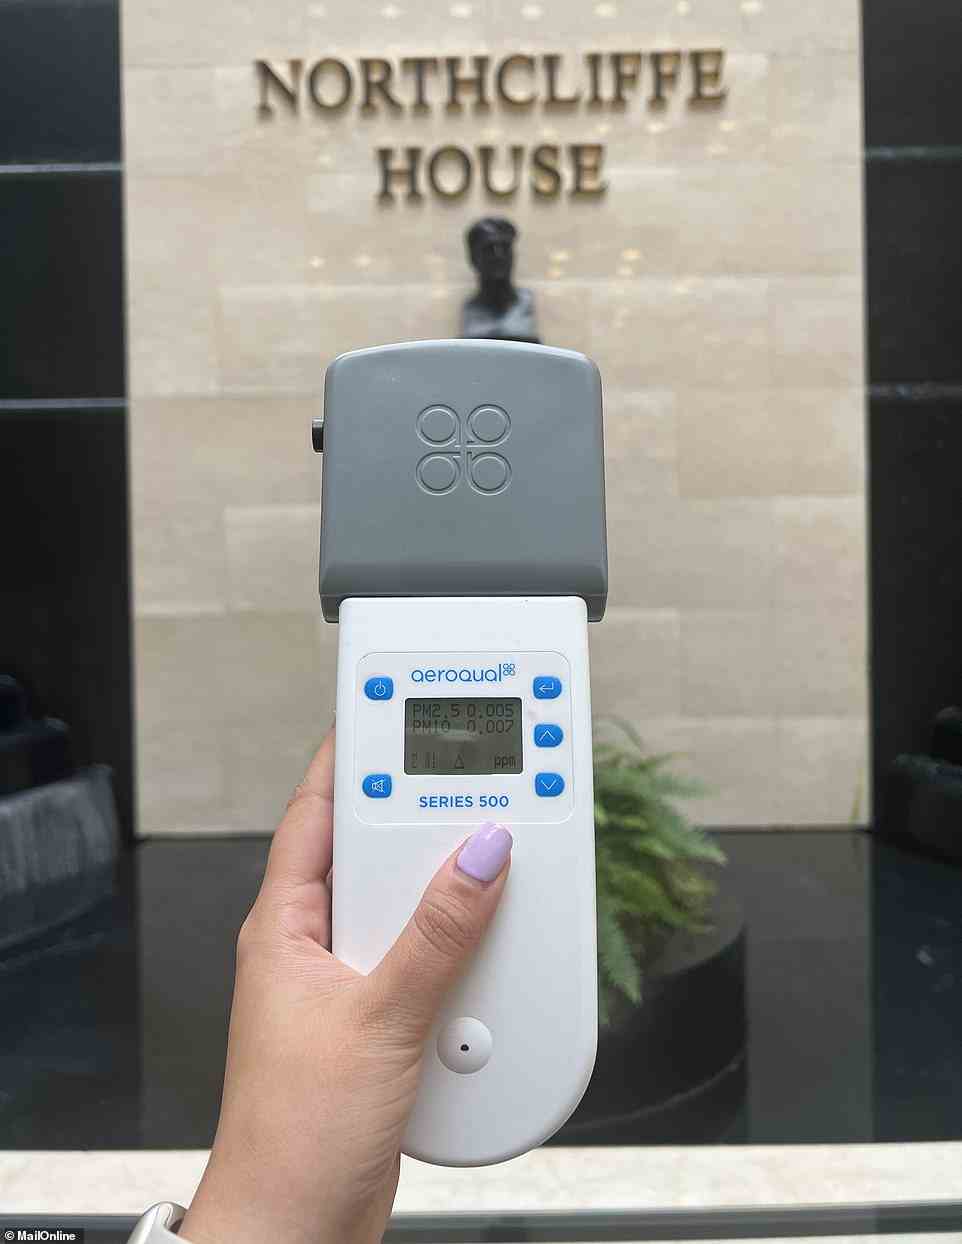 The first stop for indoor air quality testing was the MailOnline office in Kensington. Our office has a large, open-plan design and is set on the third floor of a large, multi-level building